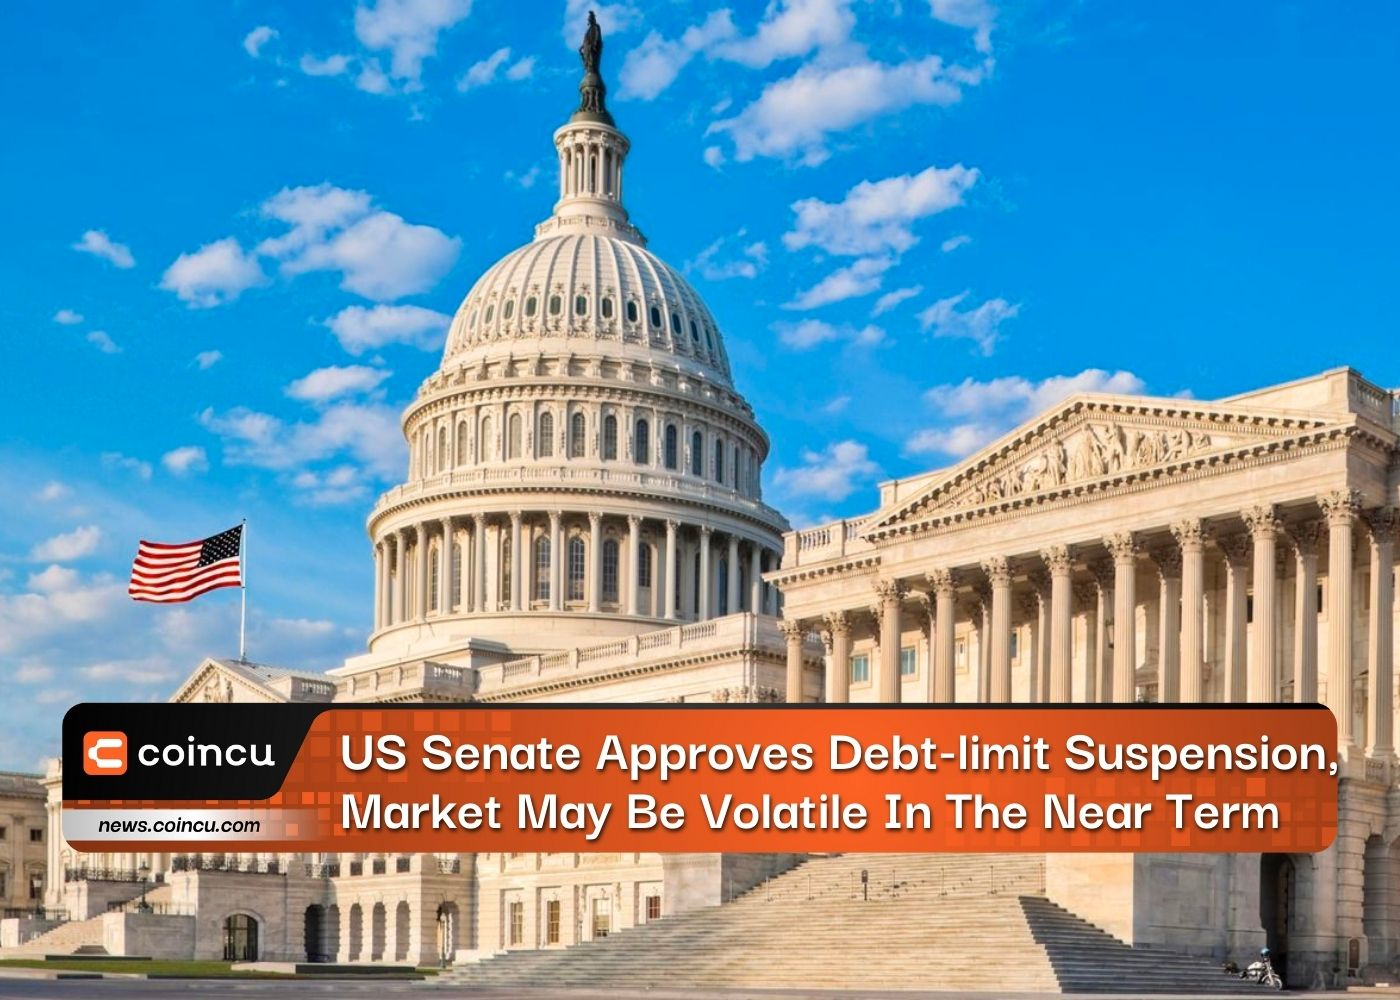 US Senate Approves Debt Limit Suspension, Market May Be Volatile In The Near Term